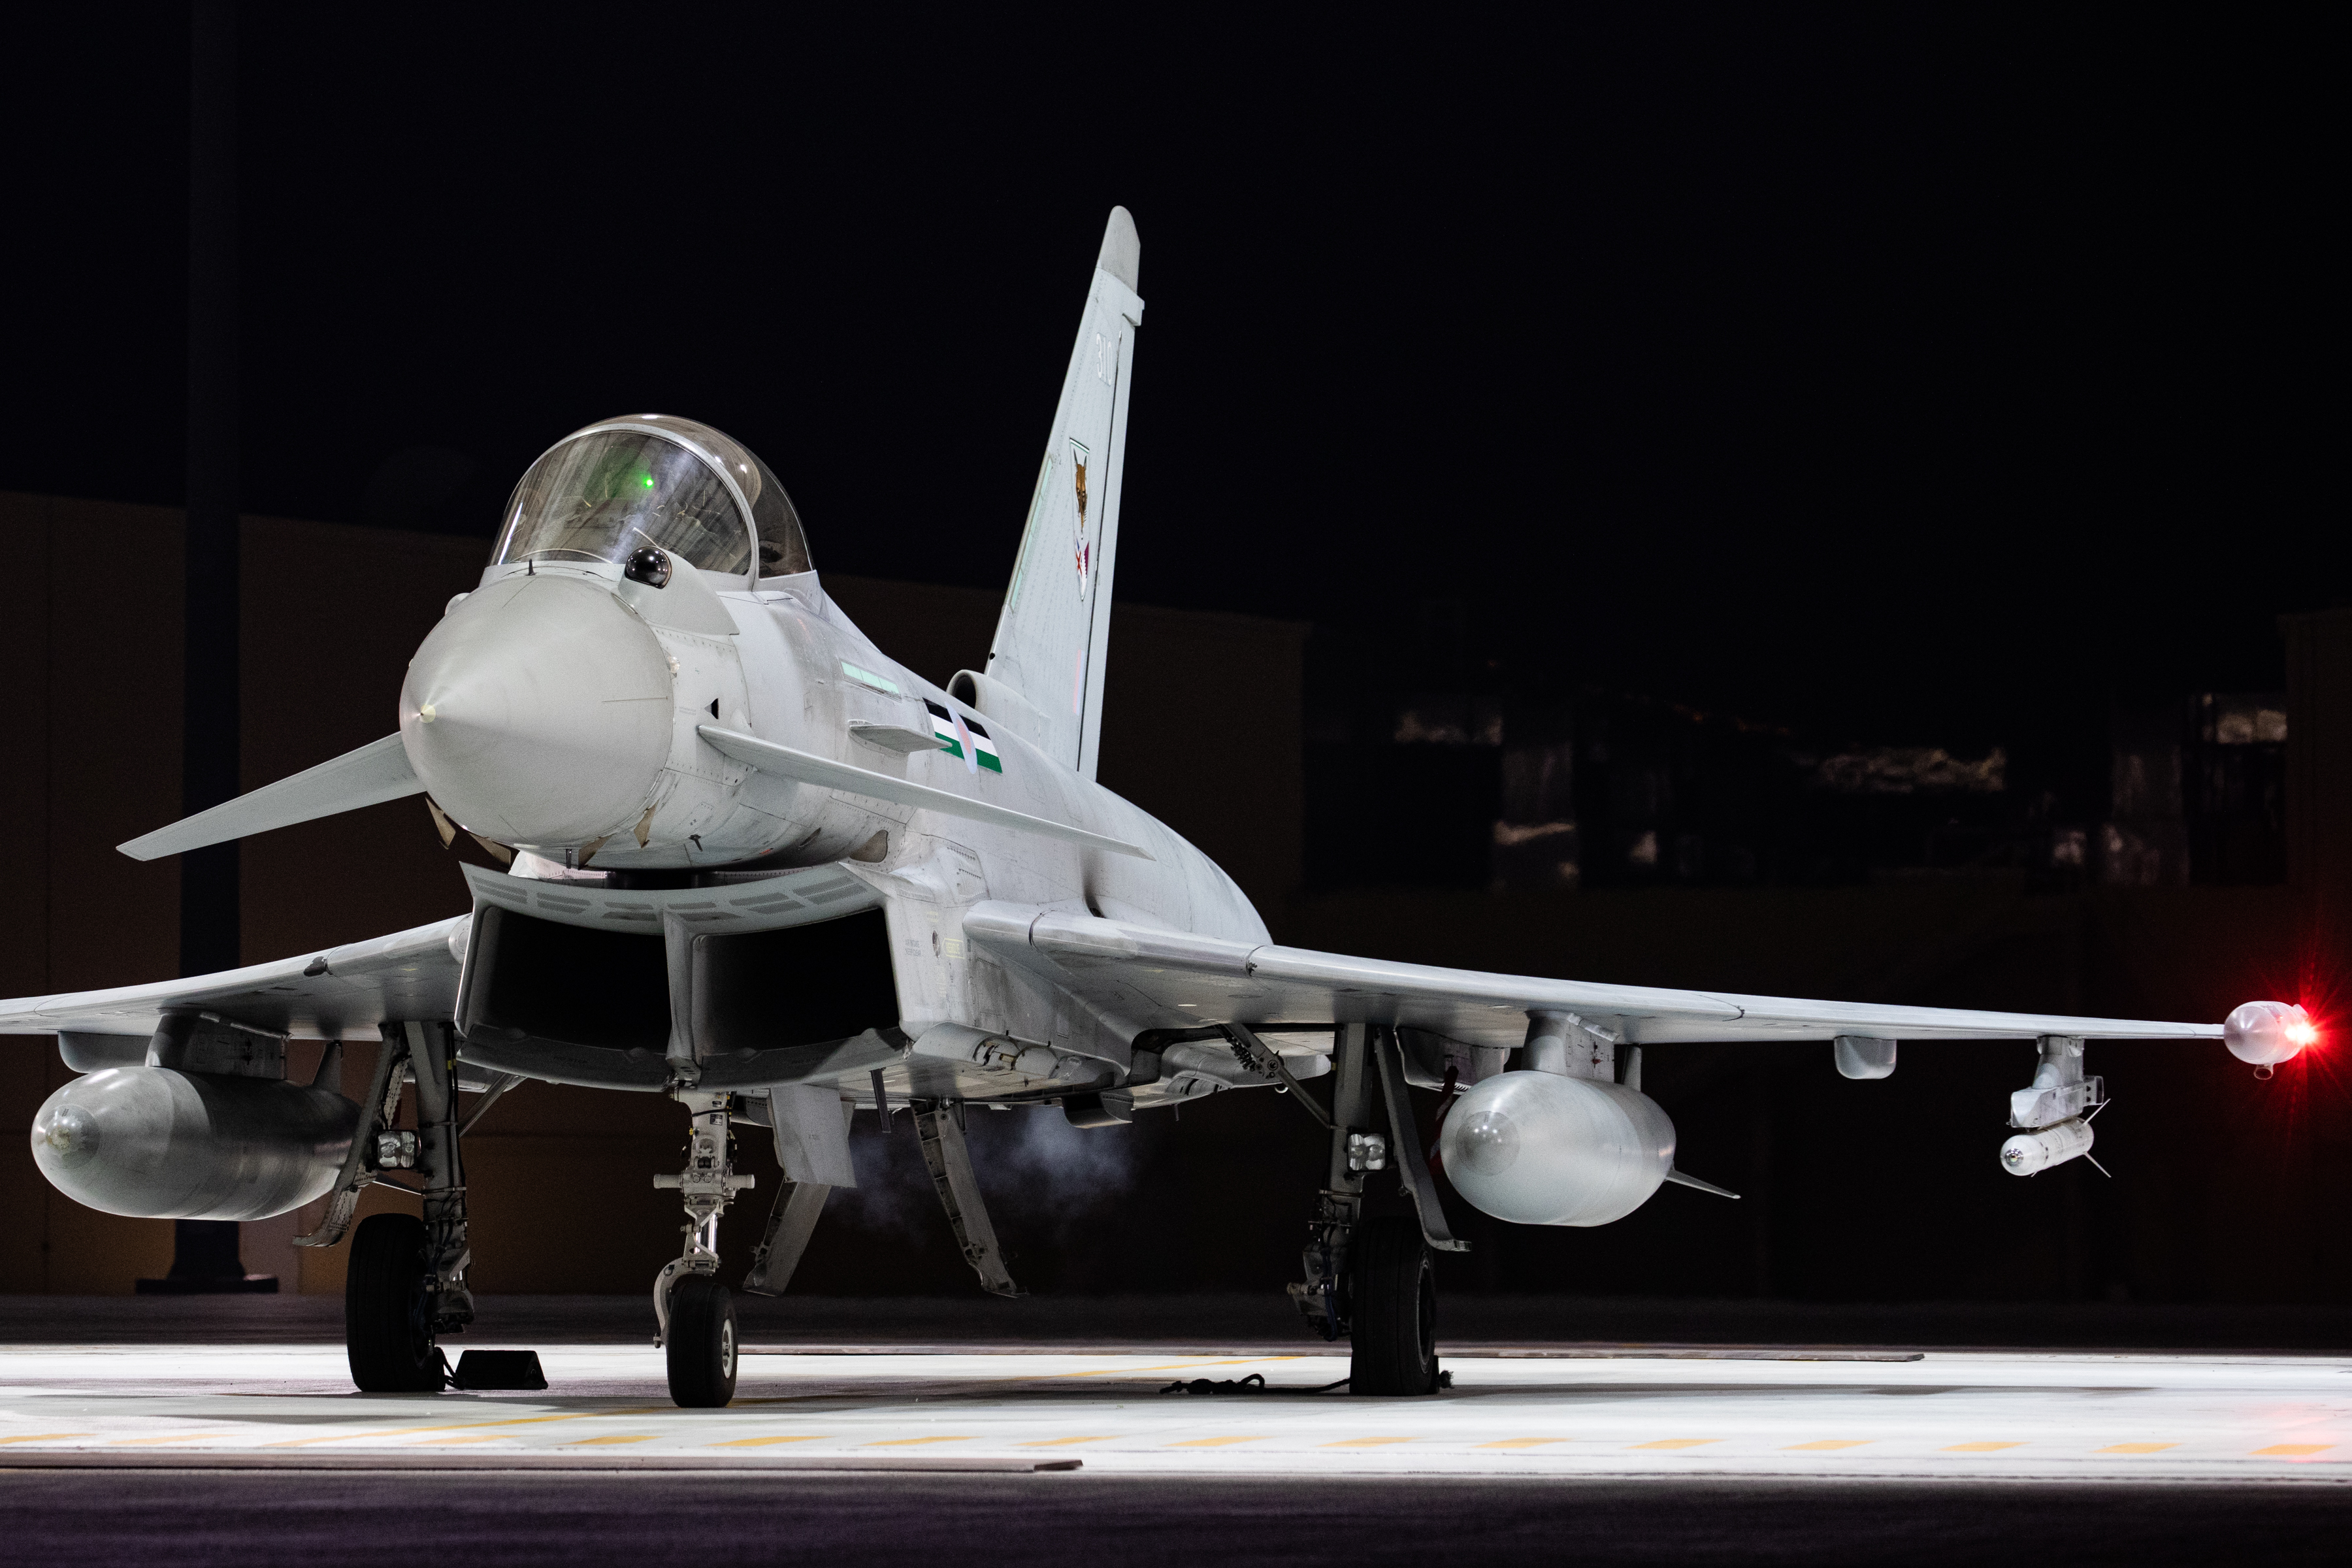 Image shows RAF Typhoon on the airfield at night.